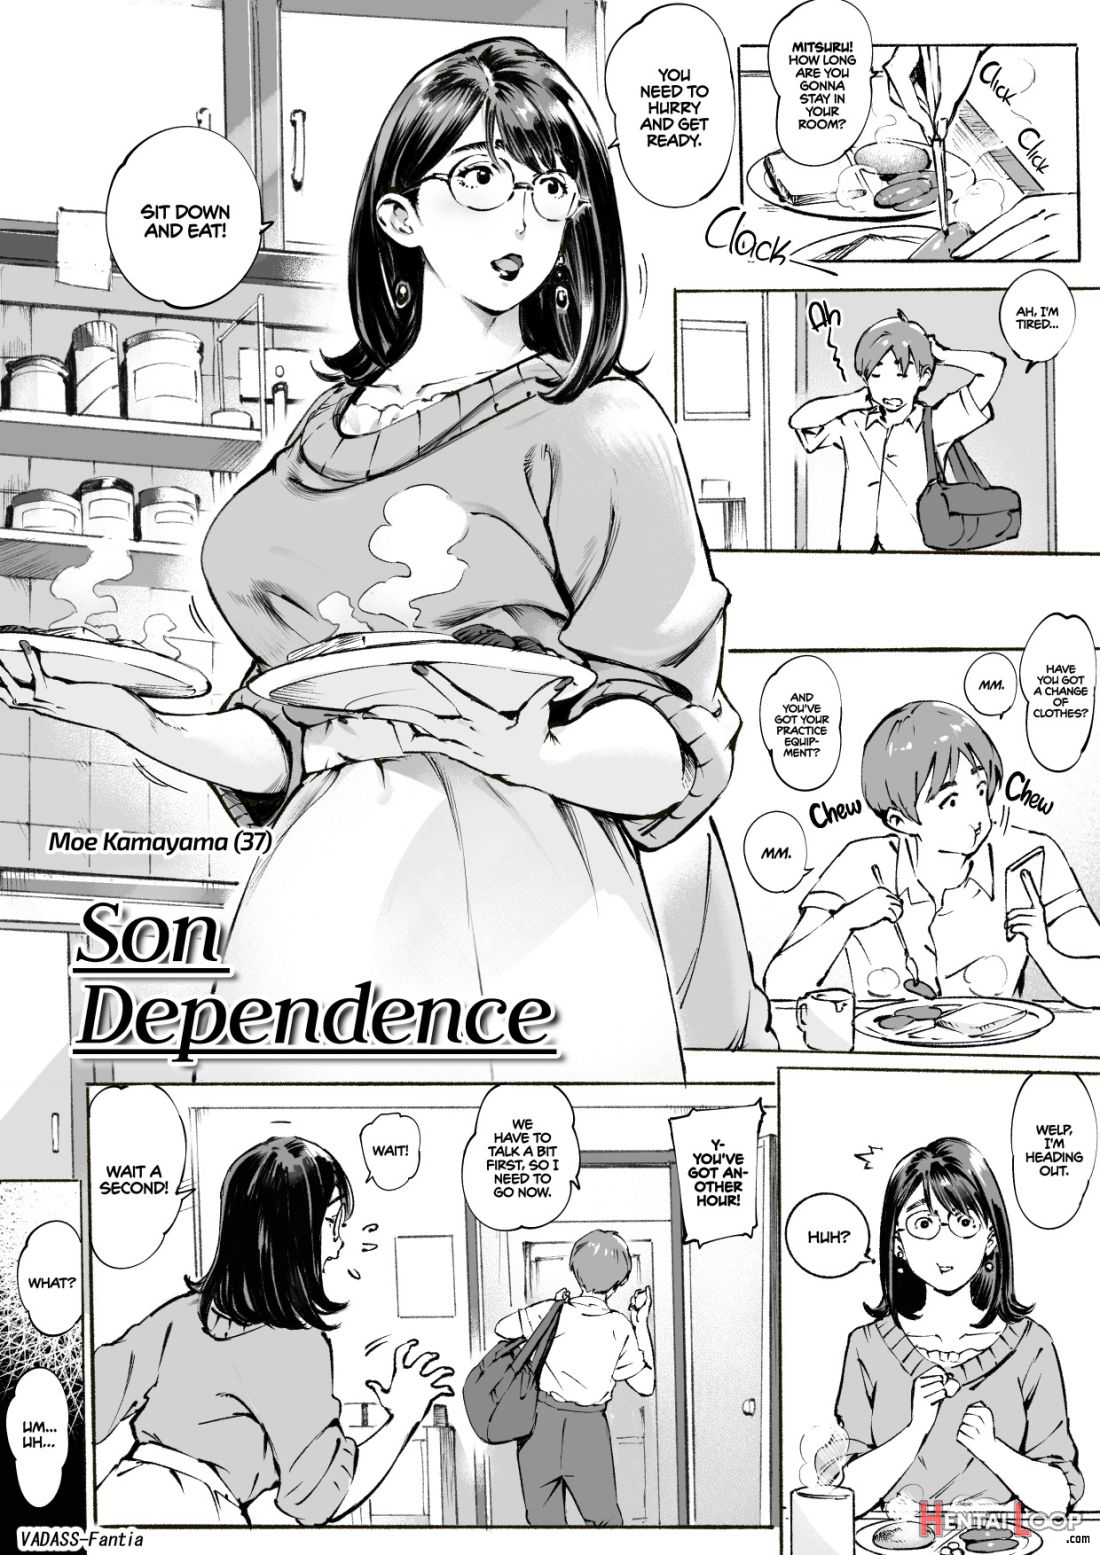 Son Dependence page 1